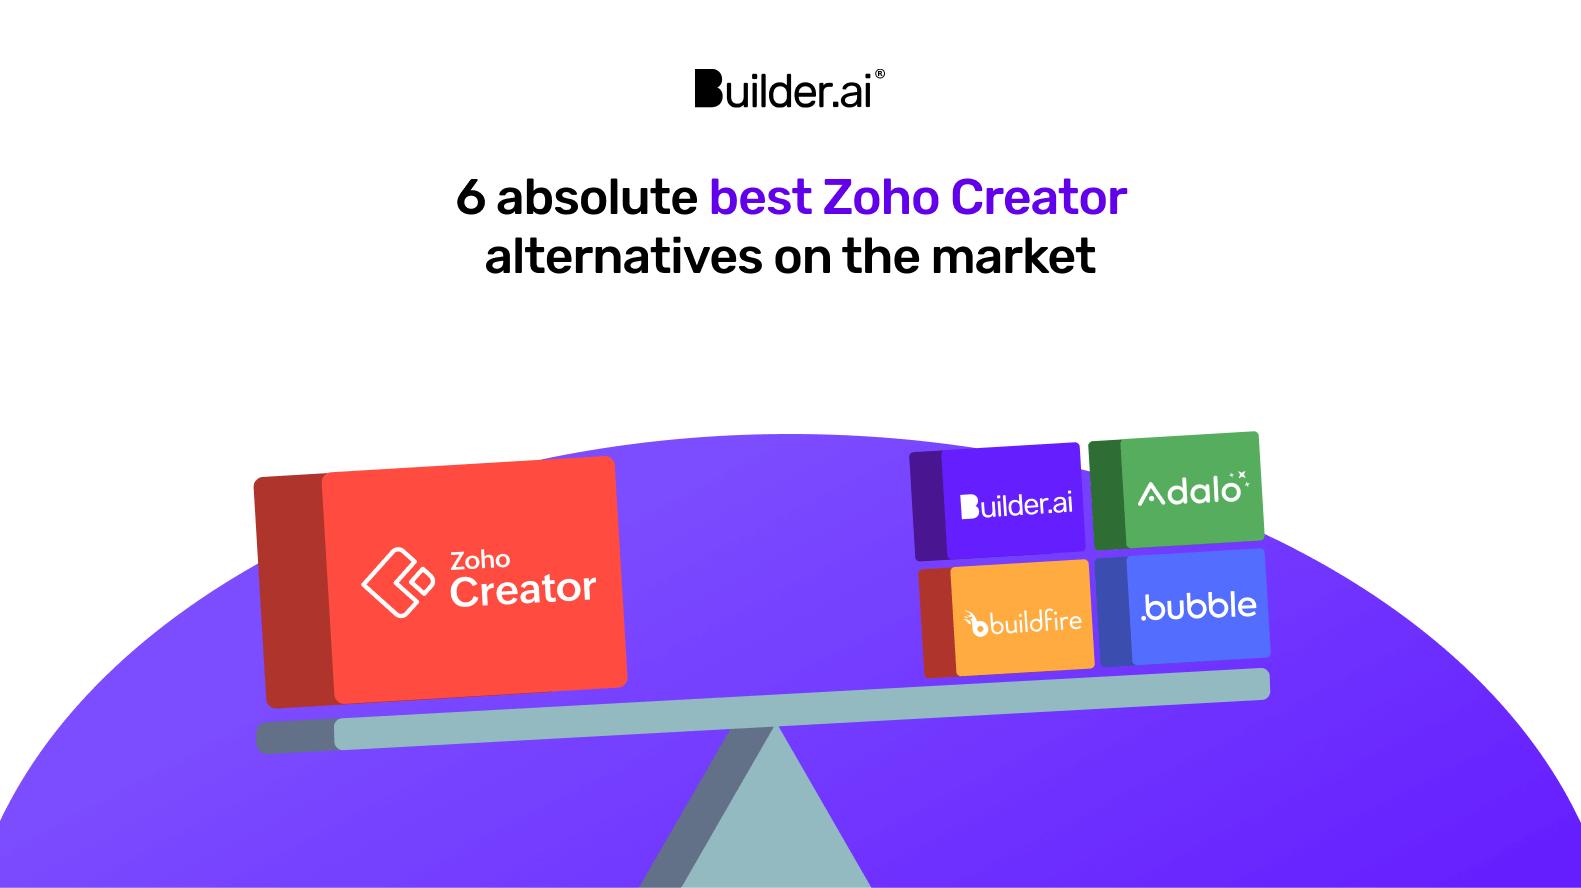 6 absolute best Zoho Creator alternatives on the market including Builder.ai, Adalo, Buildfire and Bubble.